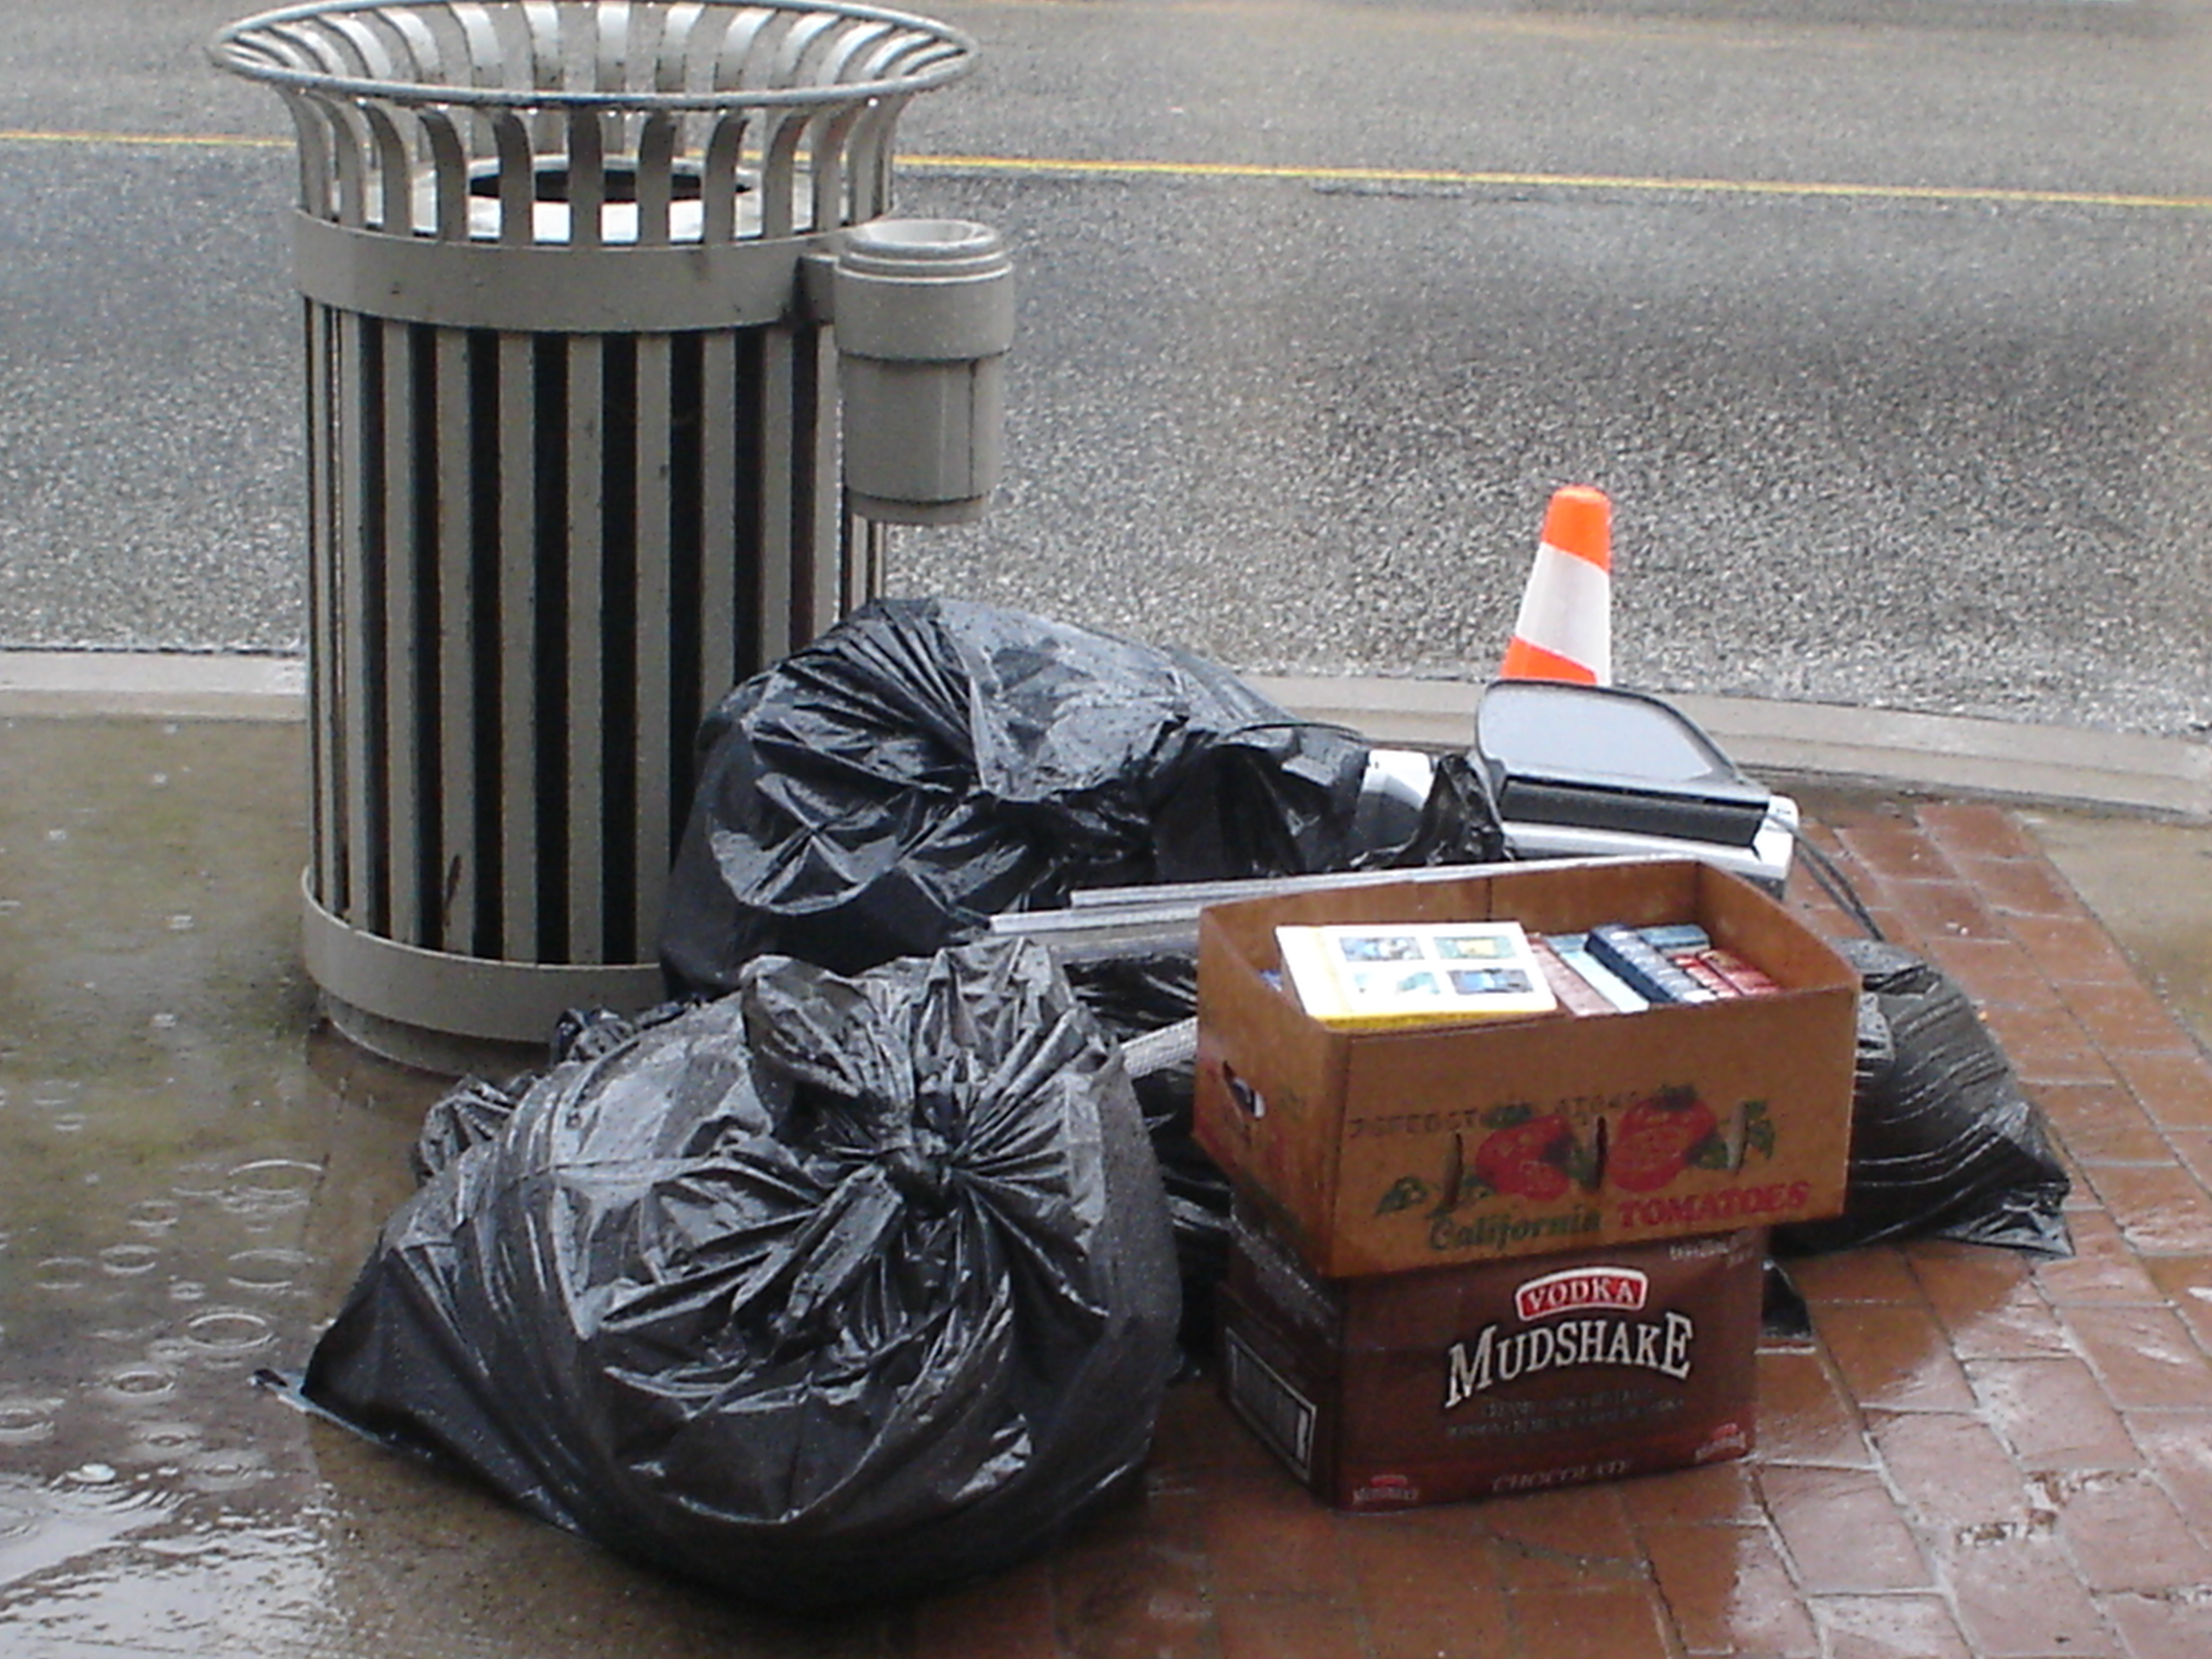 May 21, 2009 - Garbage: Who's Responsibility Should It Be to Ensure that Downtown is Kept Clean? 